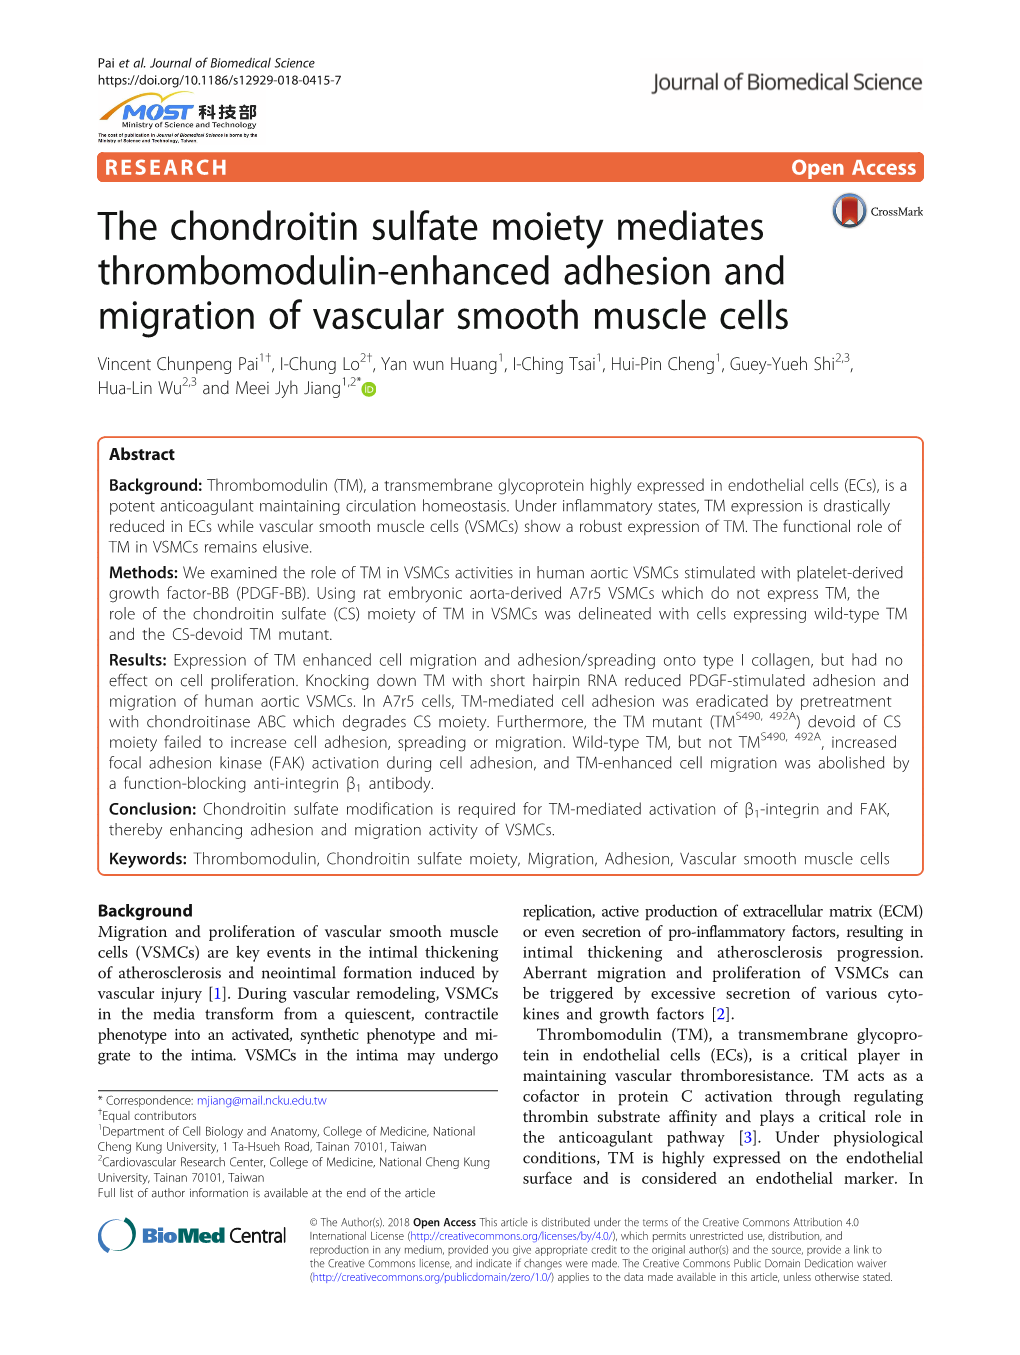 The Chondroitin Sulfate Moiety Mediates Thrombomodulin-Enhanced Adhesion and Migration of Vascular Smooth Muscle Cells